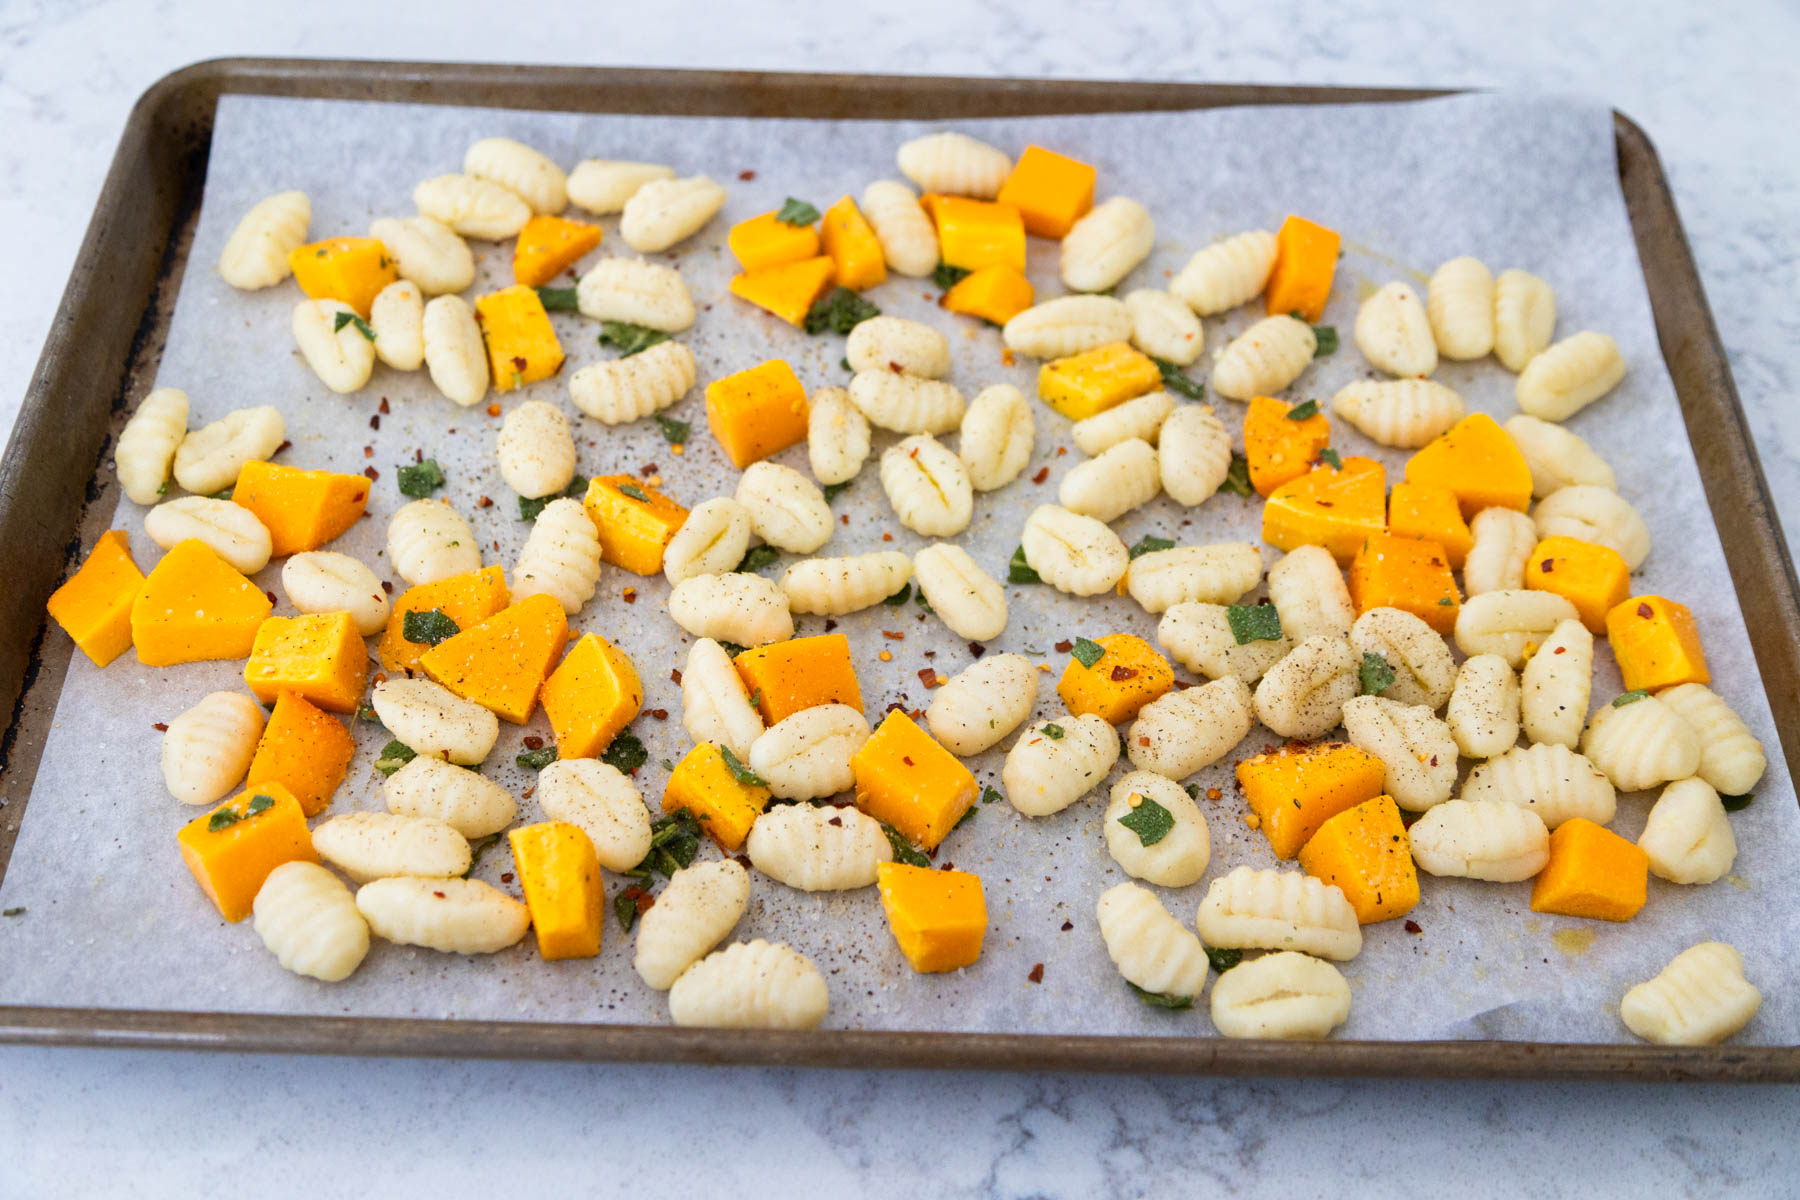 A baking pan lined with parchment paper has the gnocchi and butternut squash spread out into an even layer.